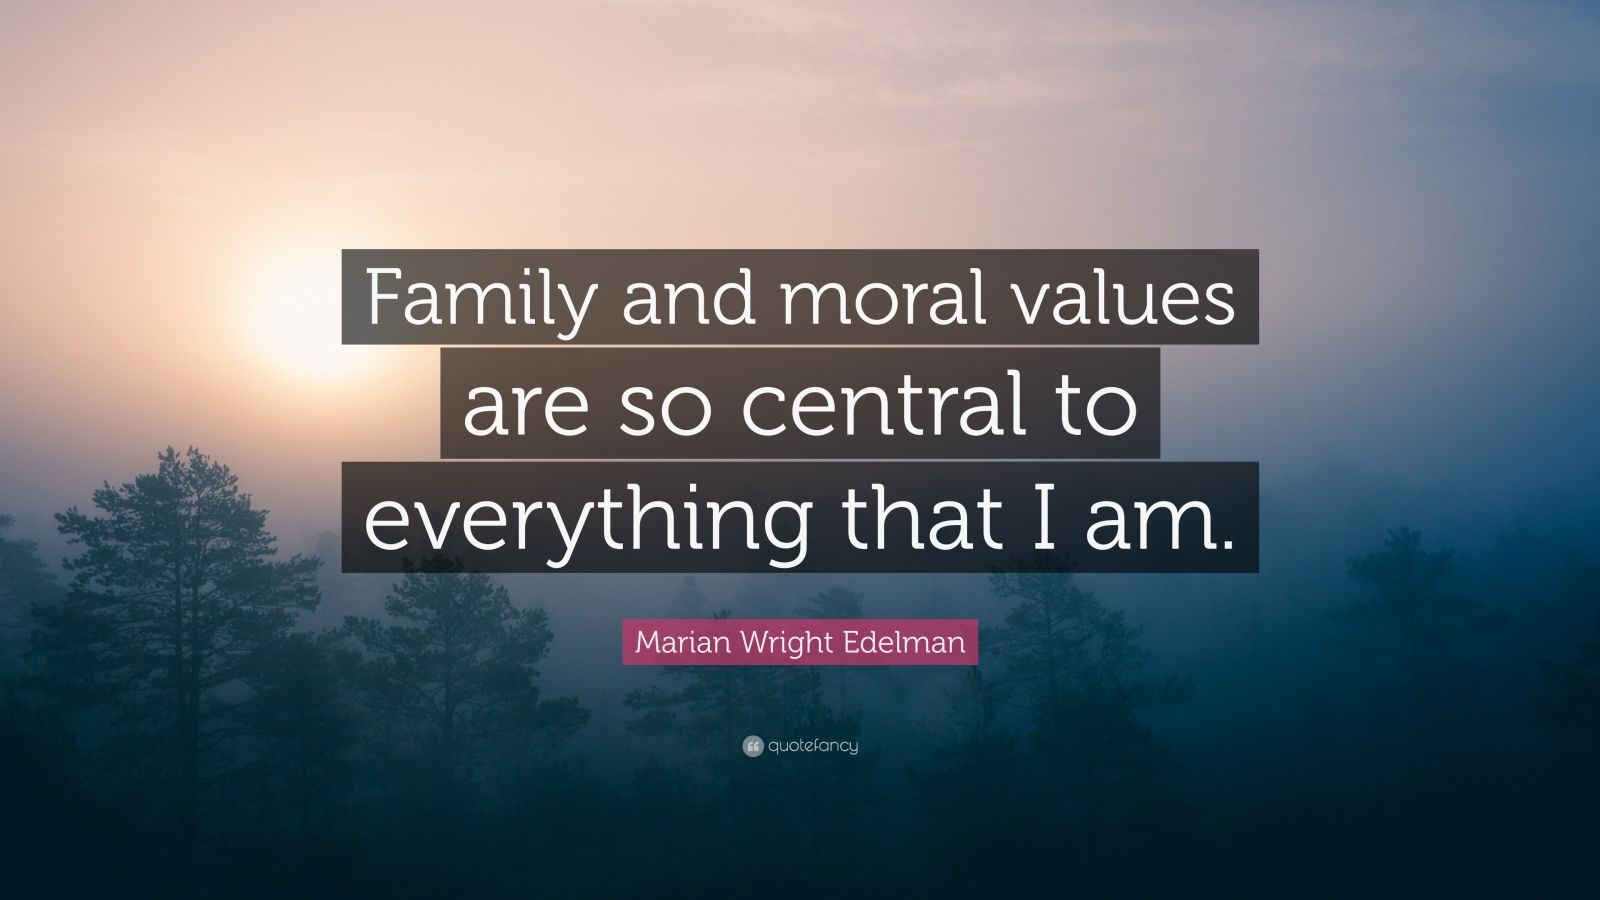 Marian Wright Edelman Quote: “Family and moral values are so central to